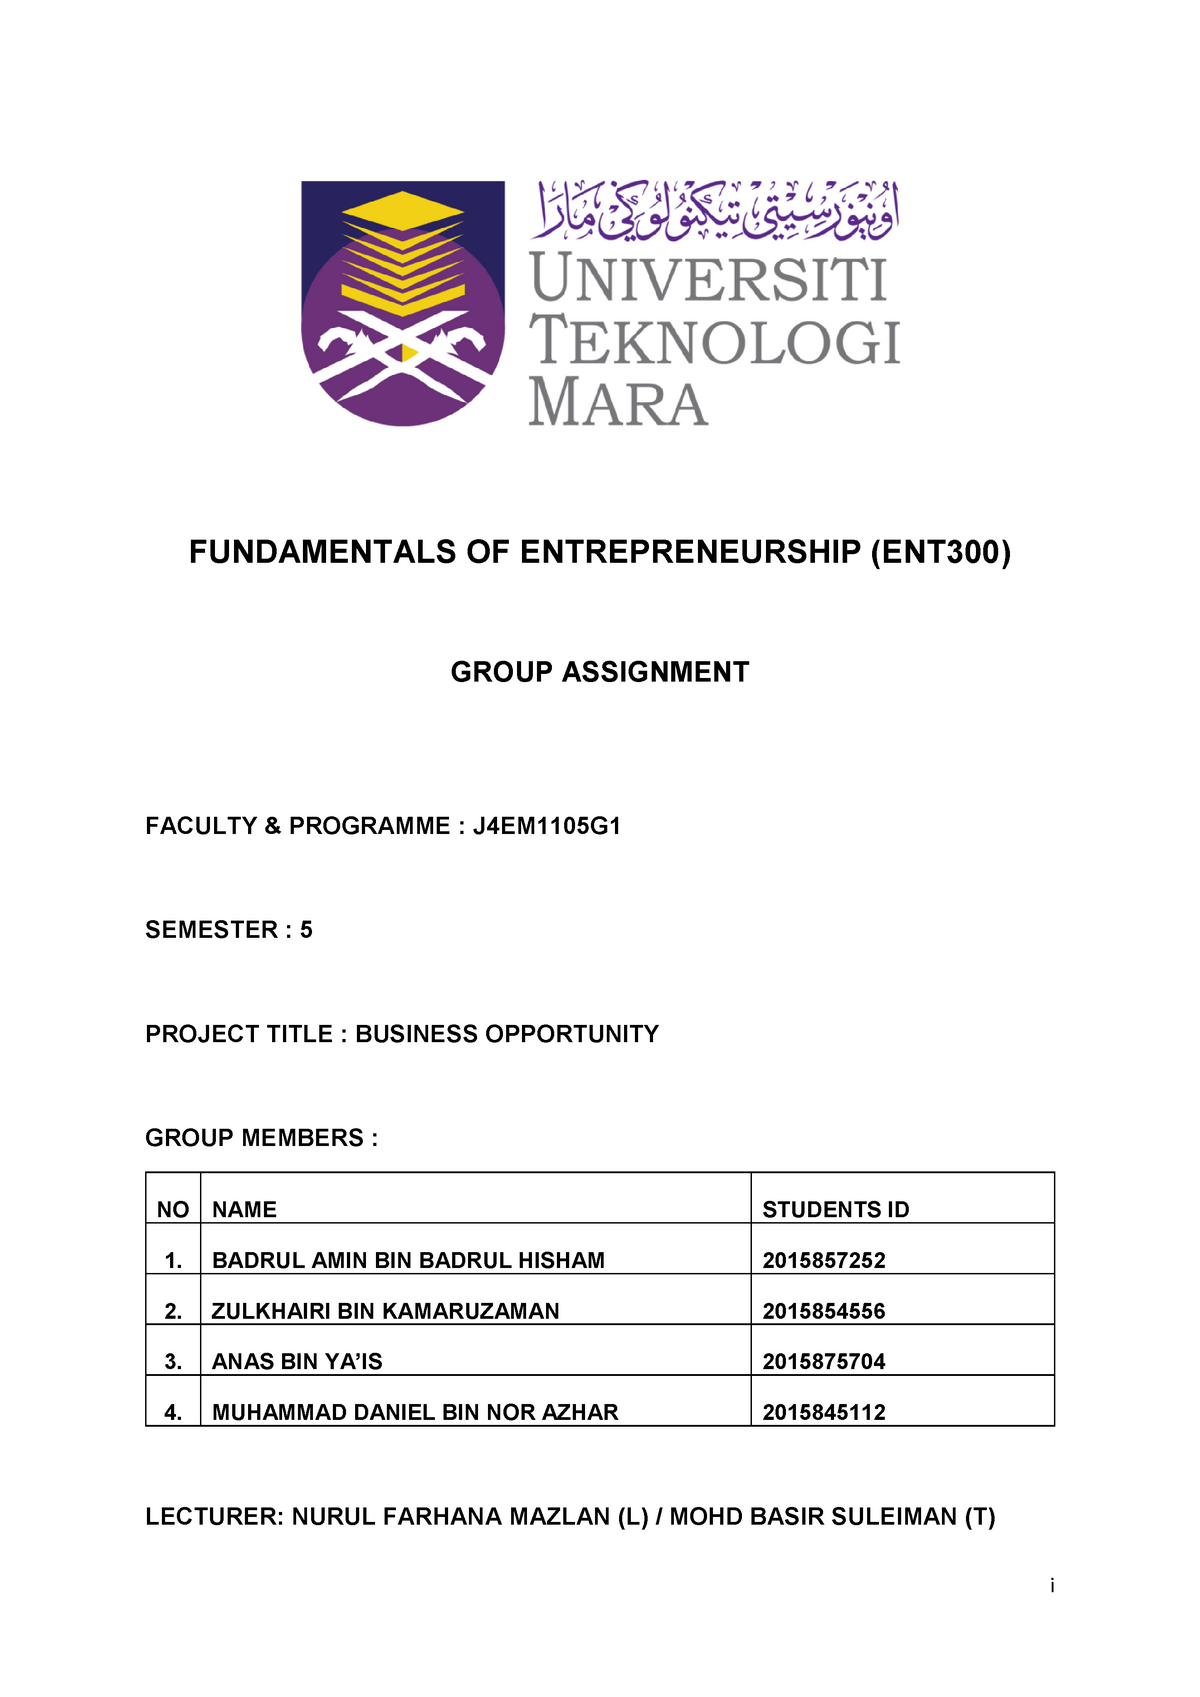 contoh assignment ent300 business opportunity